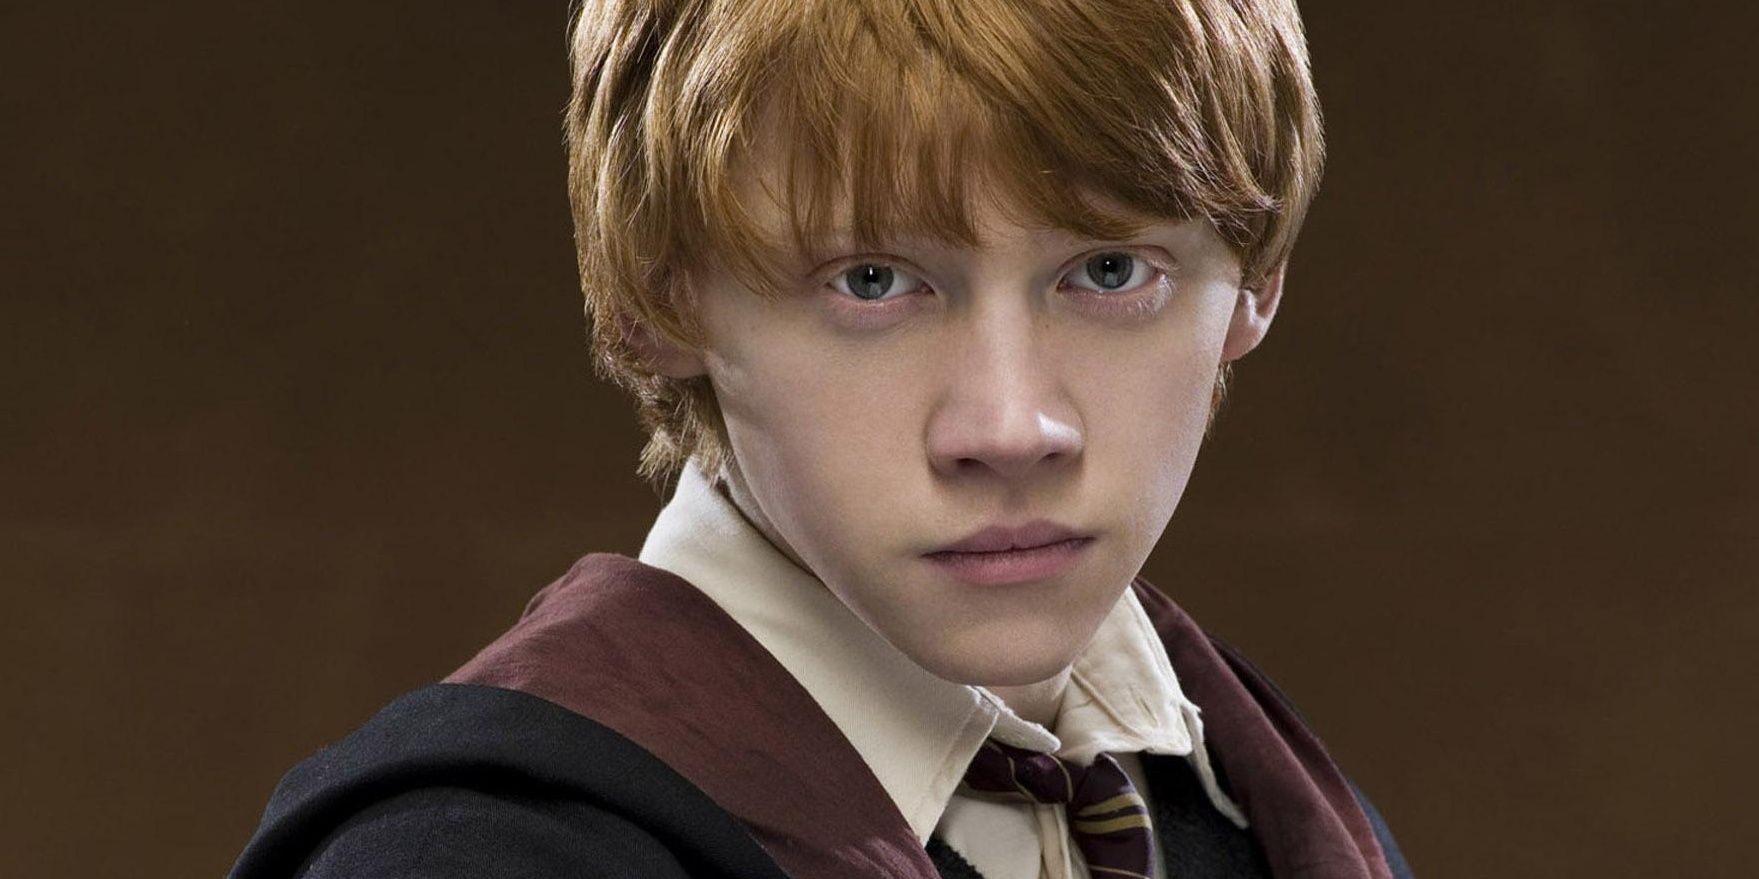 Harry Potter: 10 Things About Ron Weasley The Movies Deliberately